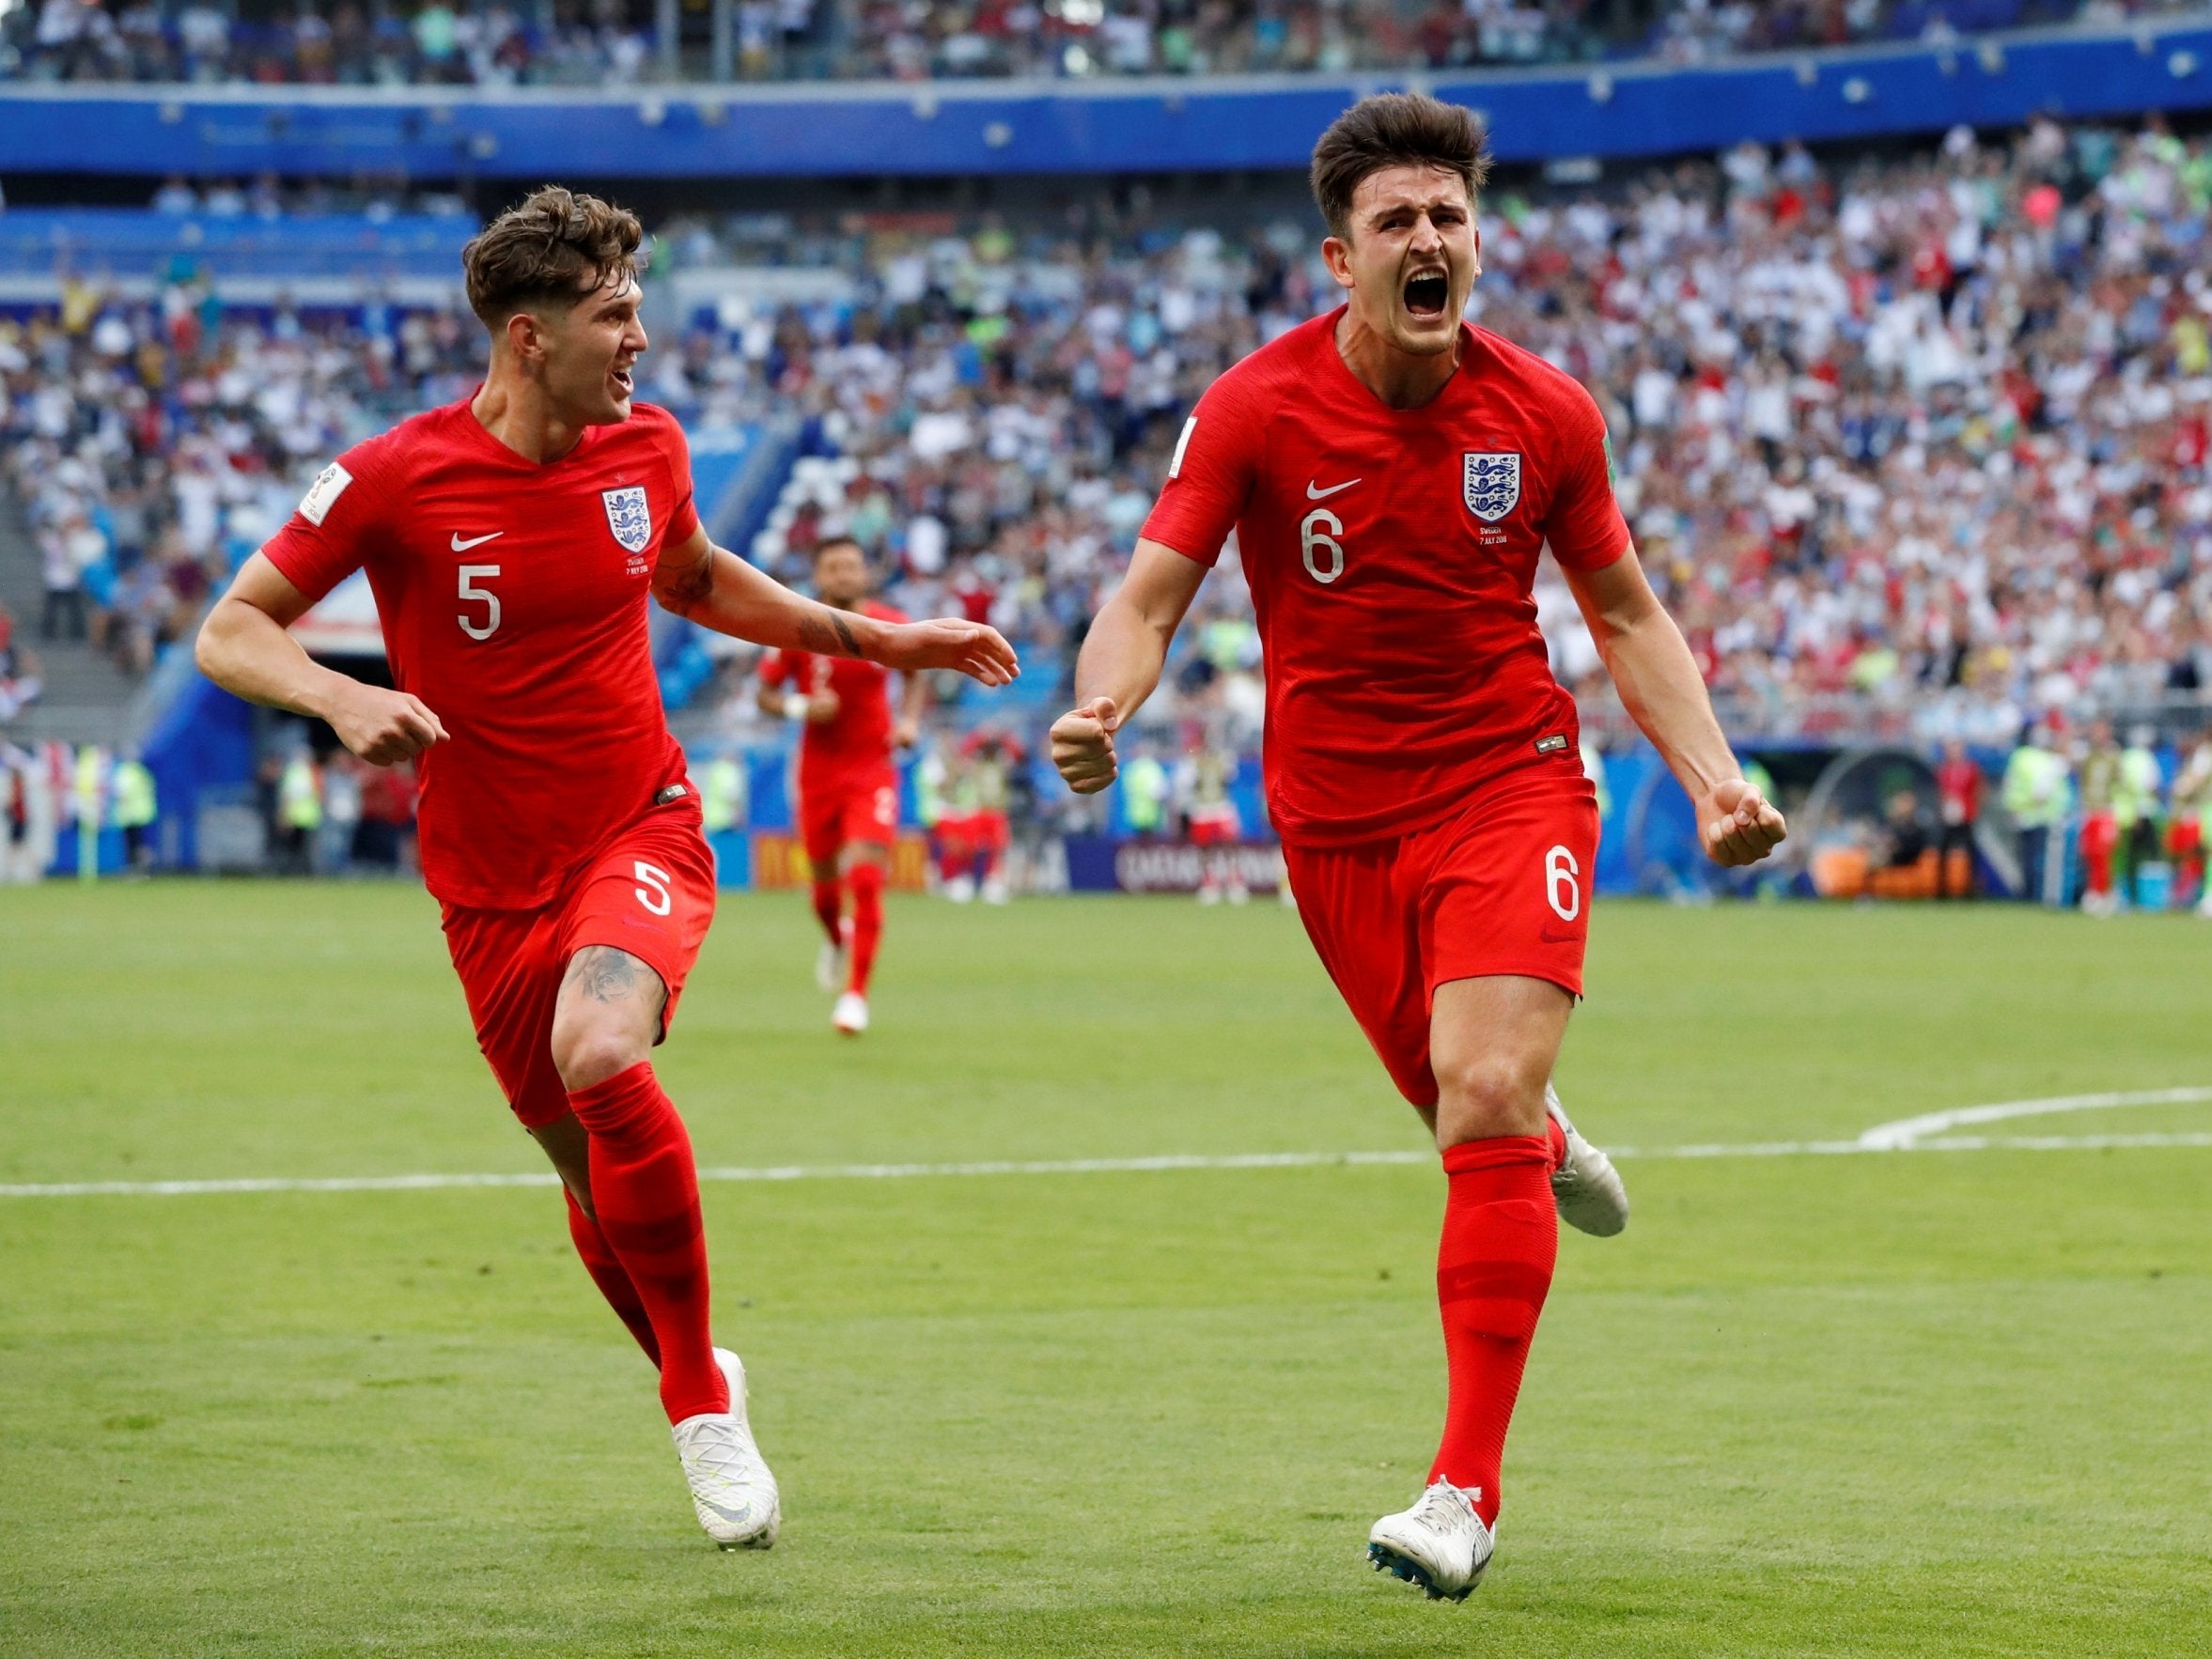 England's Harry Maguire, who grew up in Sheffield, celebrates scoring the first goal with John Stones